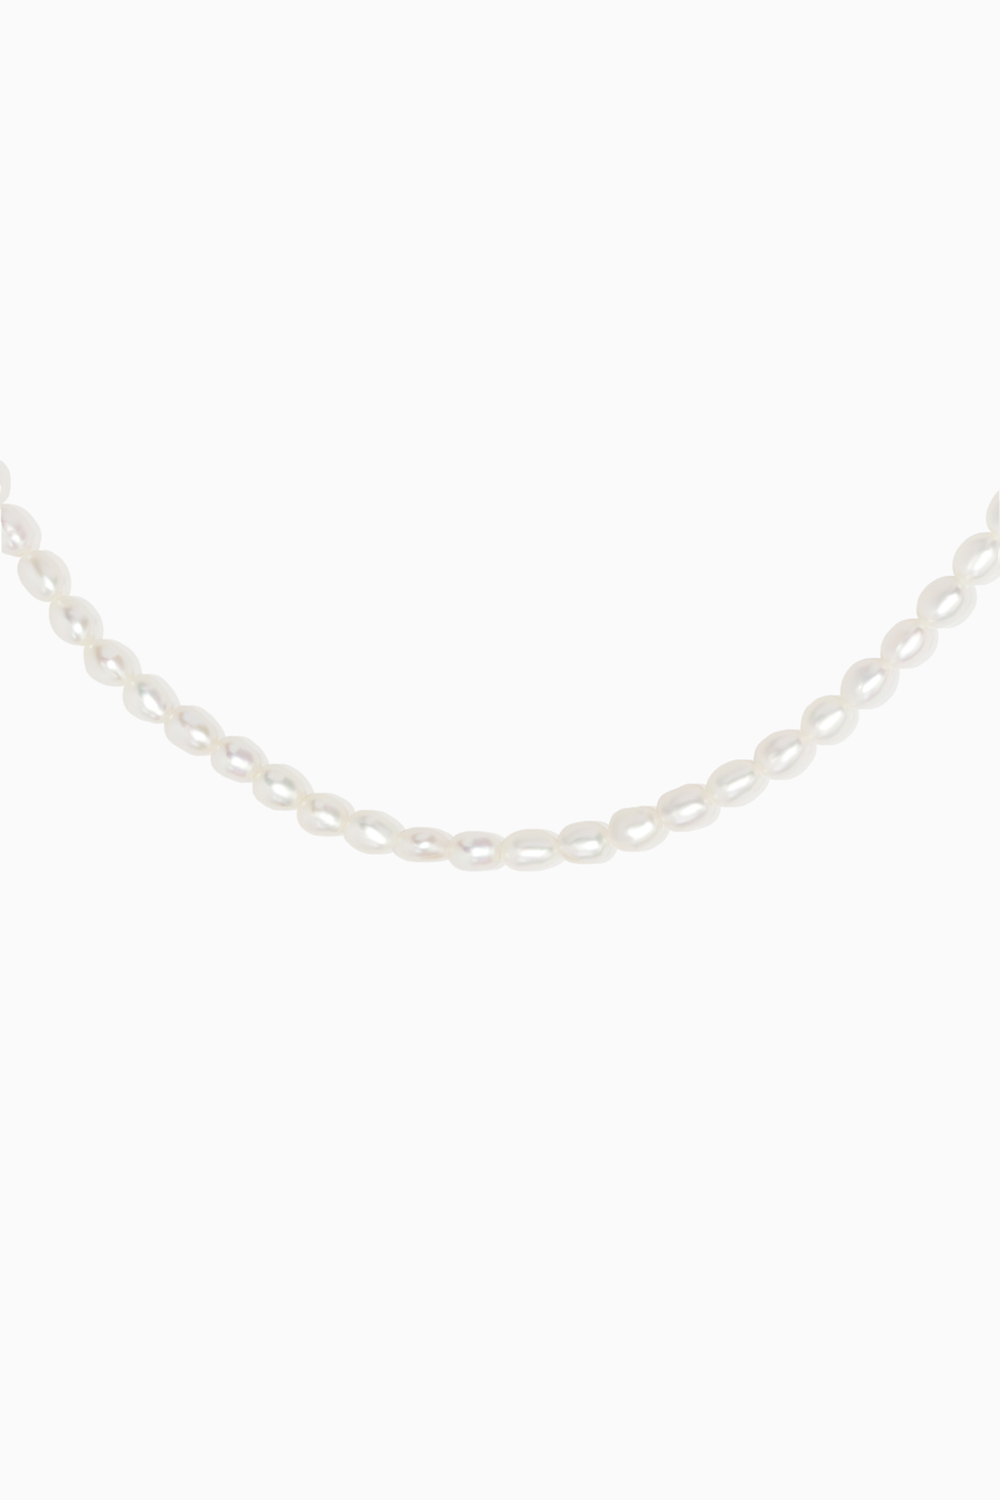 classic-pearl-necklace-6